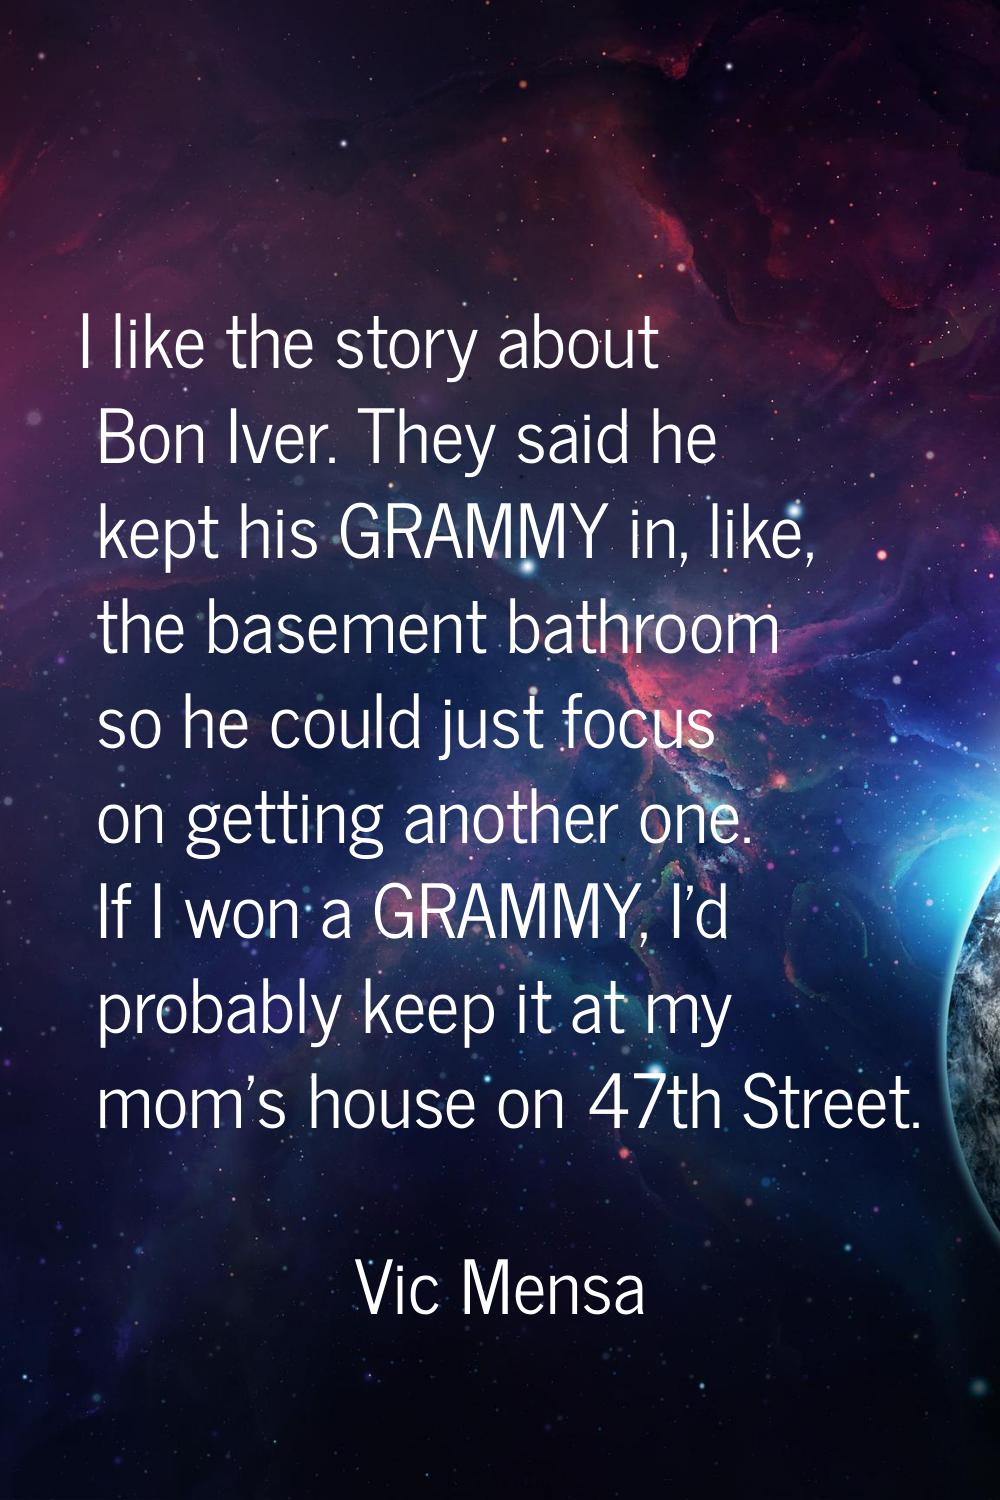 I like the story about Bon Iver. They said he kept his GRAMMY in, like, the basement bathroom so he